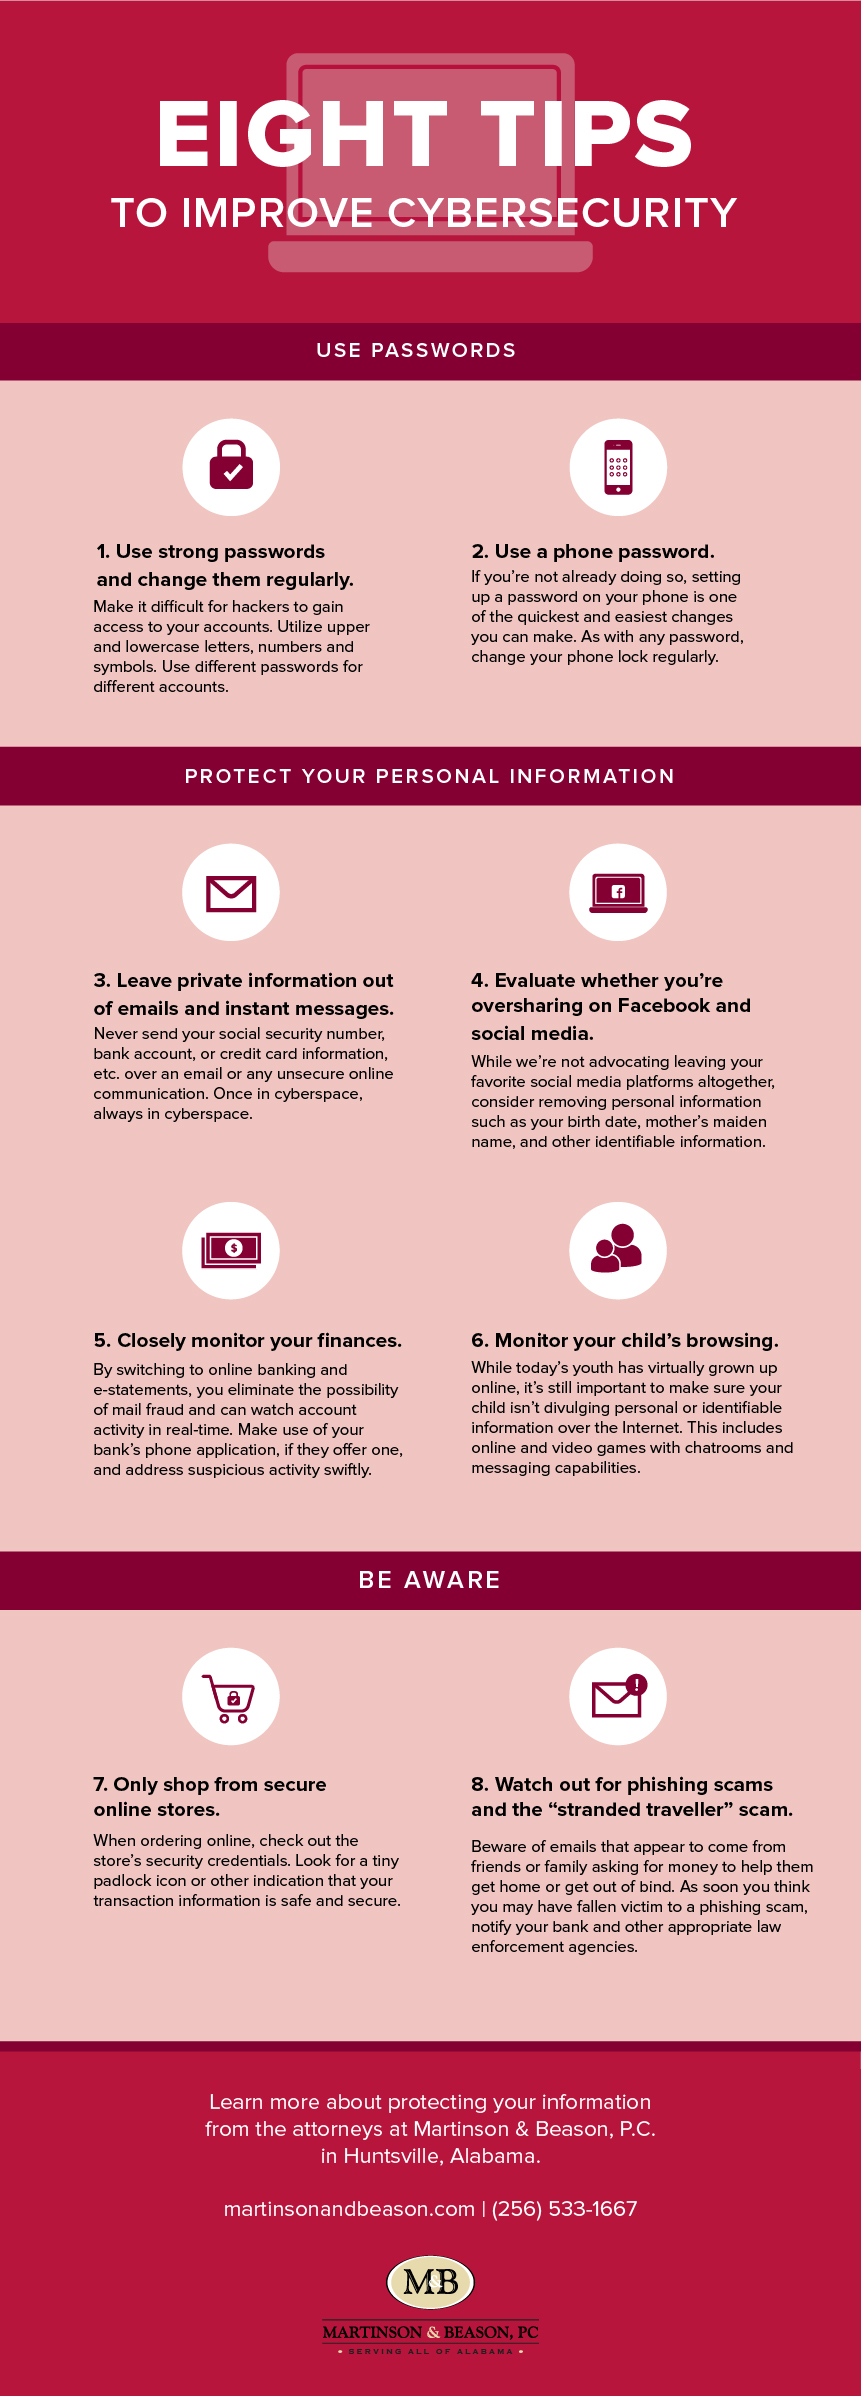 Martinson&Beason - Cyber Security Infographic